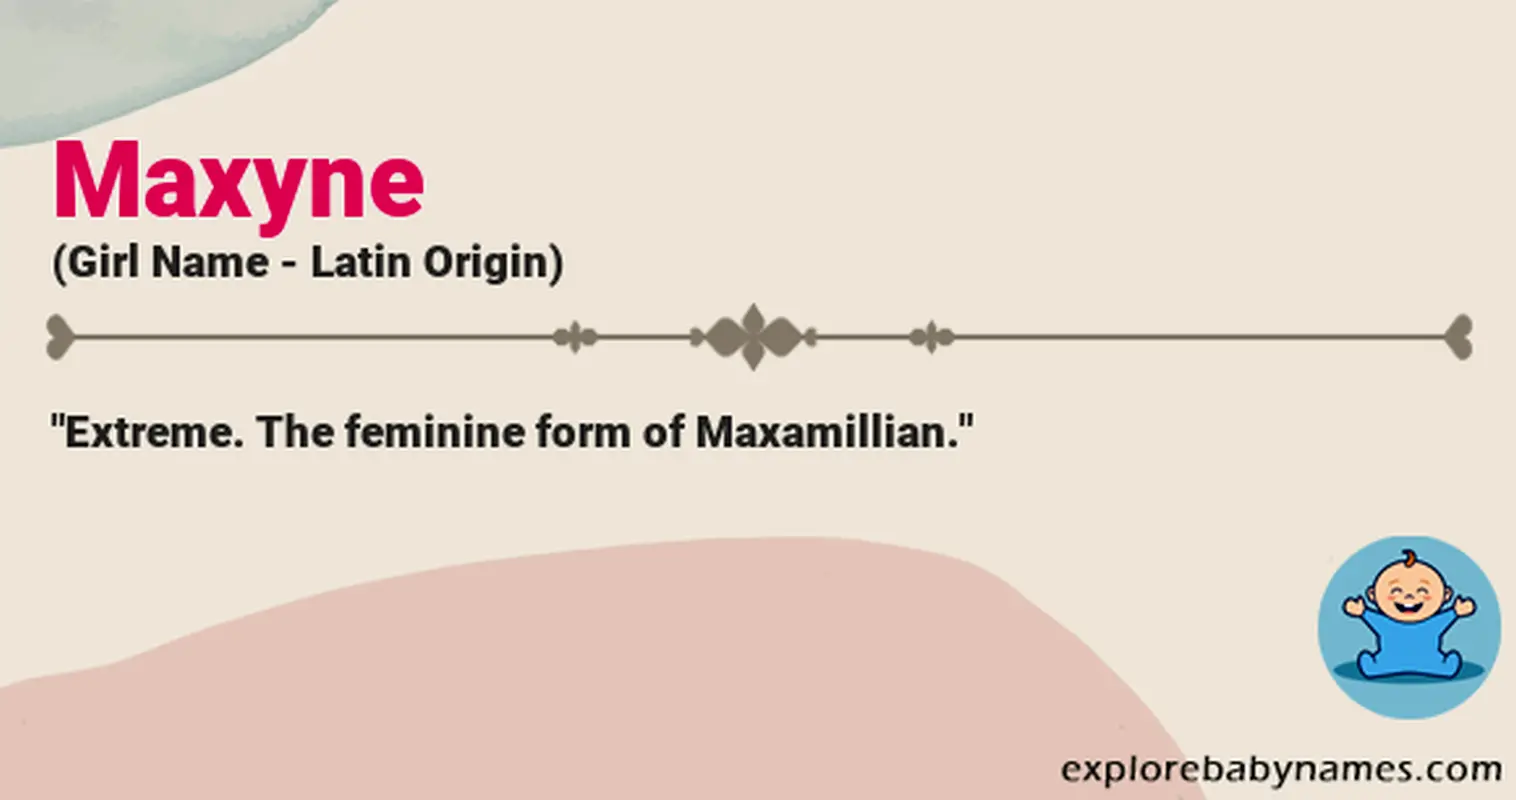 Meaning of Maxyne